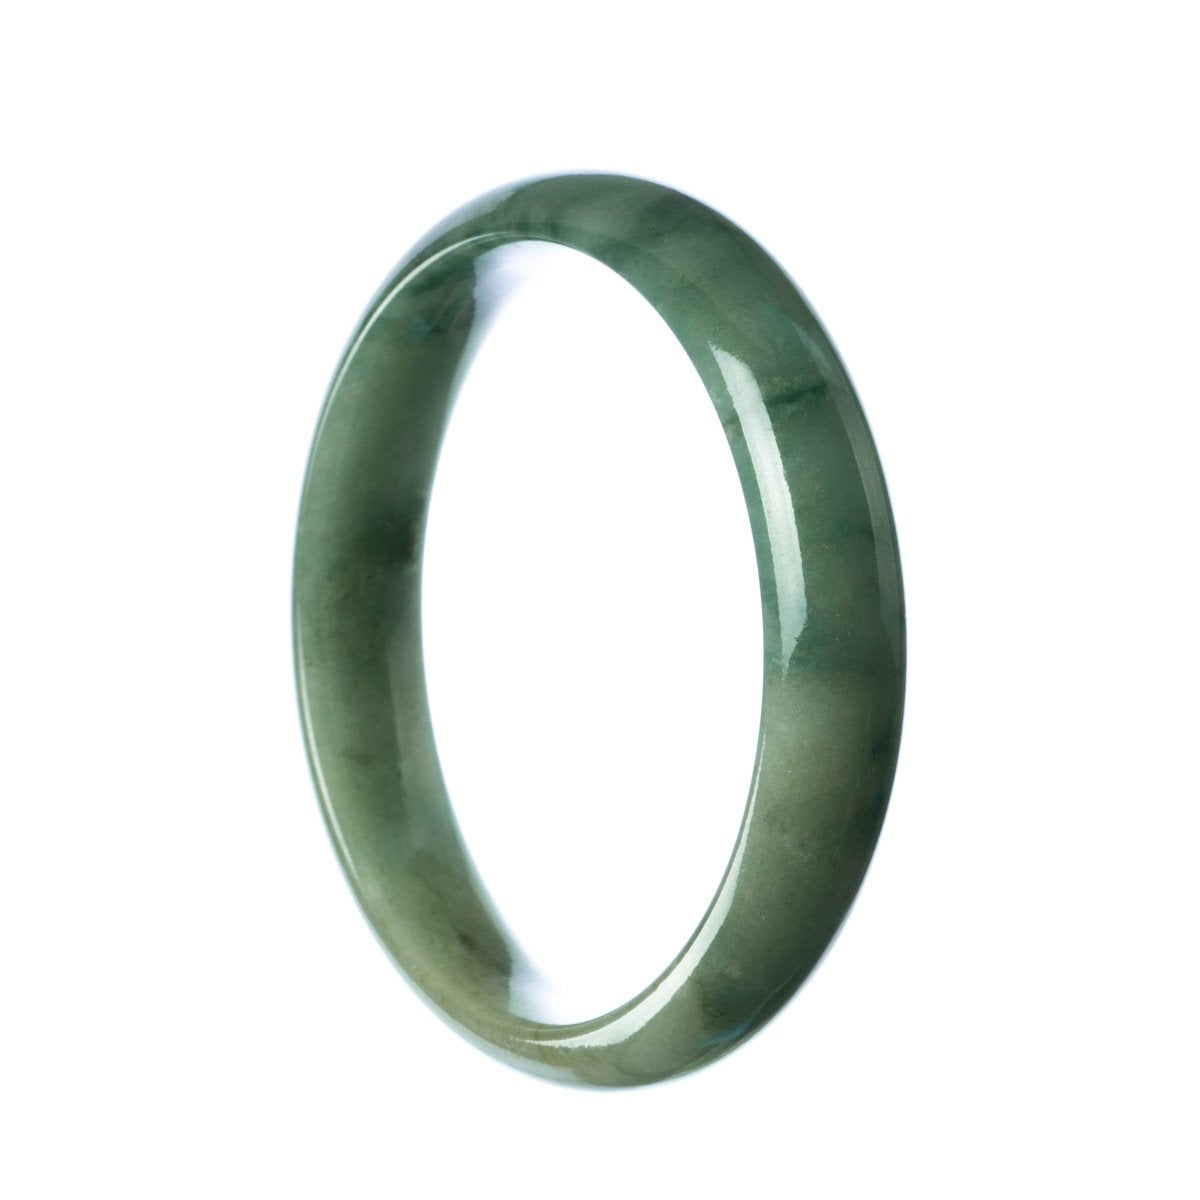 A close-up of a beautiful, half-moon shaped green jade bracelet with a smooth and polished surface. The bracelet is made with real grade A green jade, measuring 59mm in size. It is a stunning piece of jewelry from MAYS™.